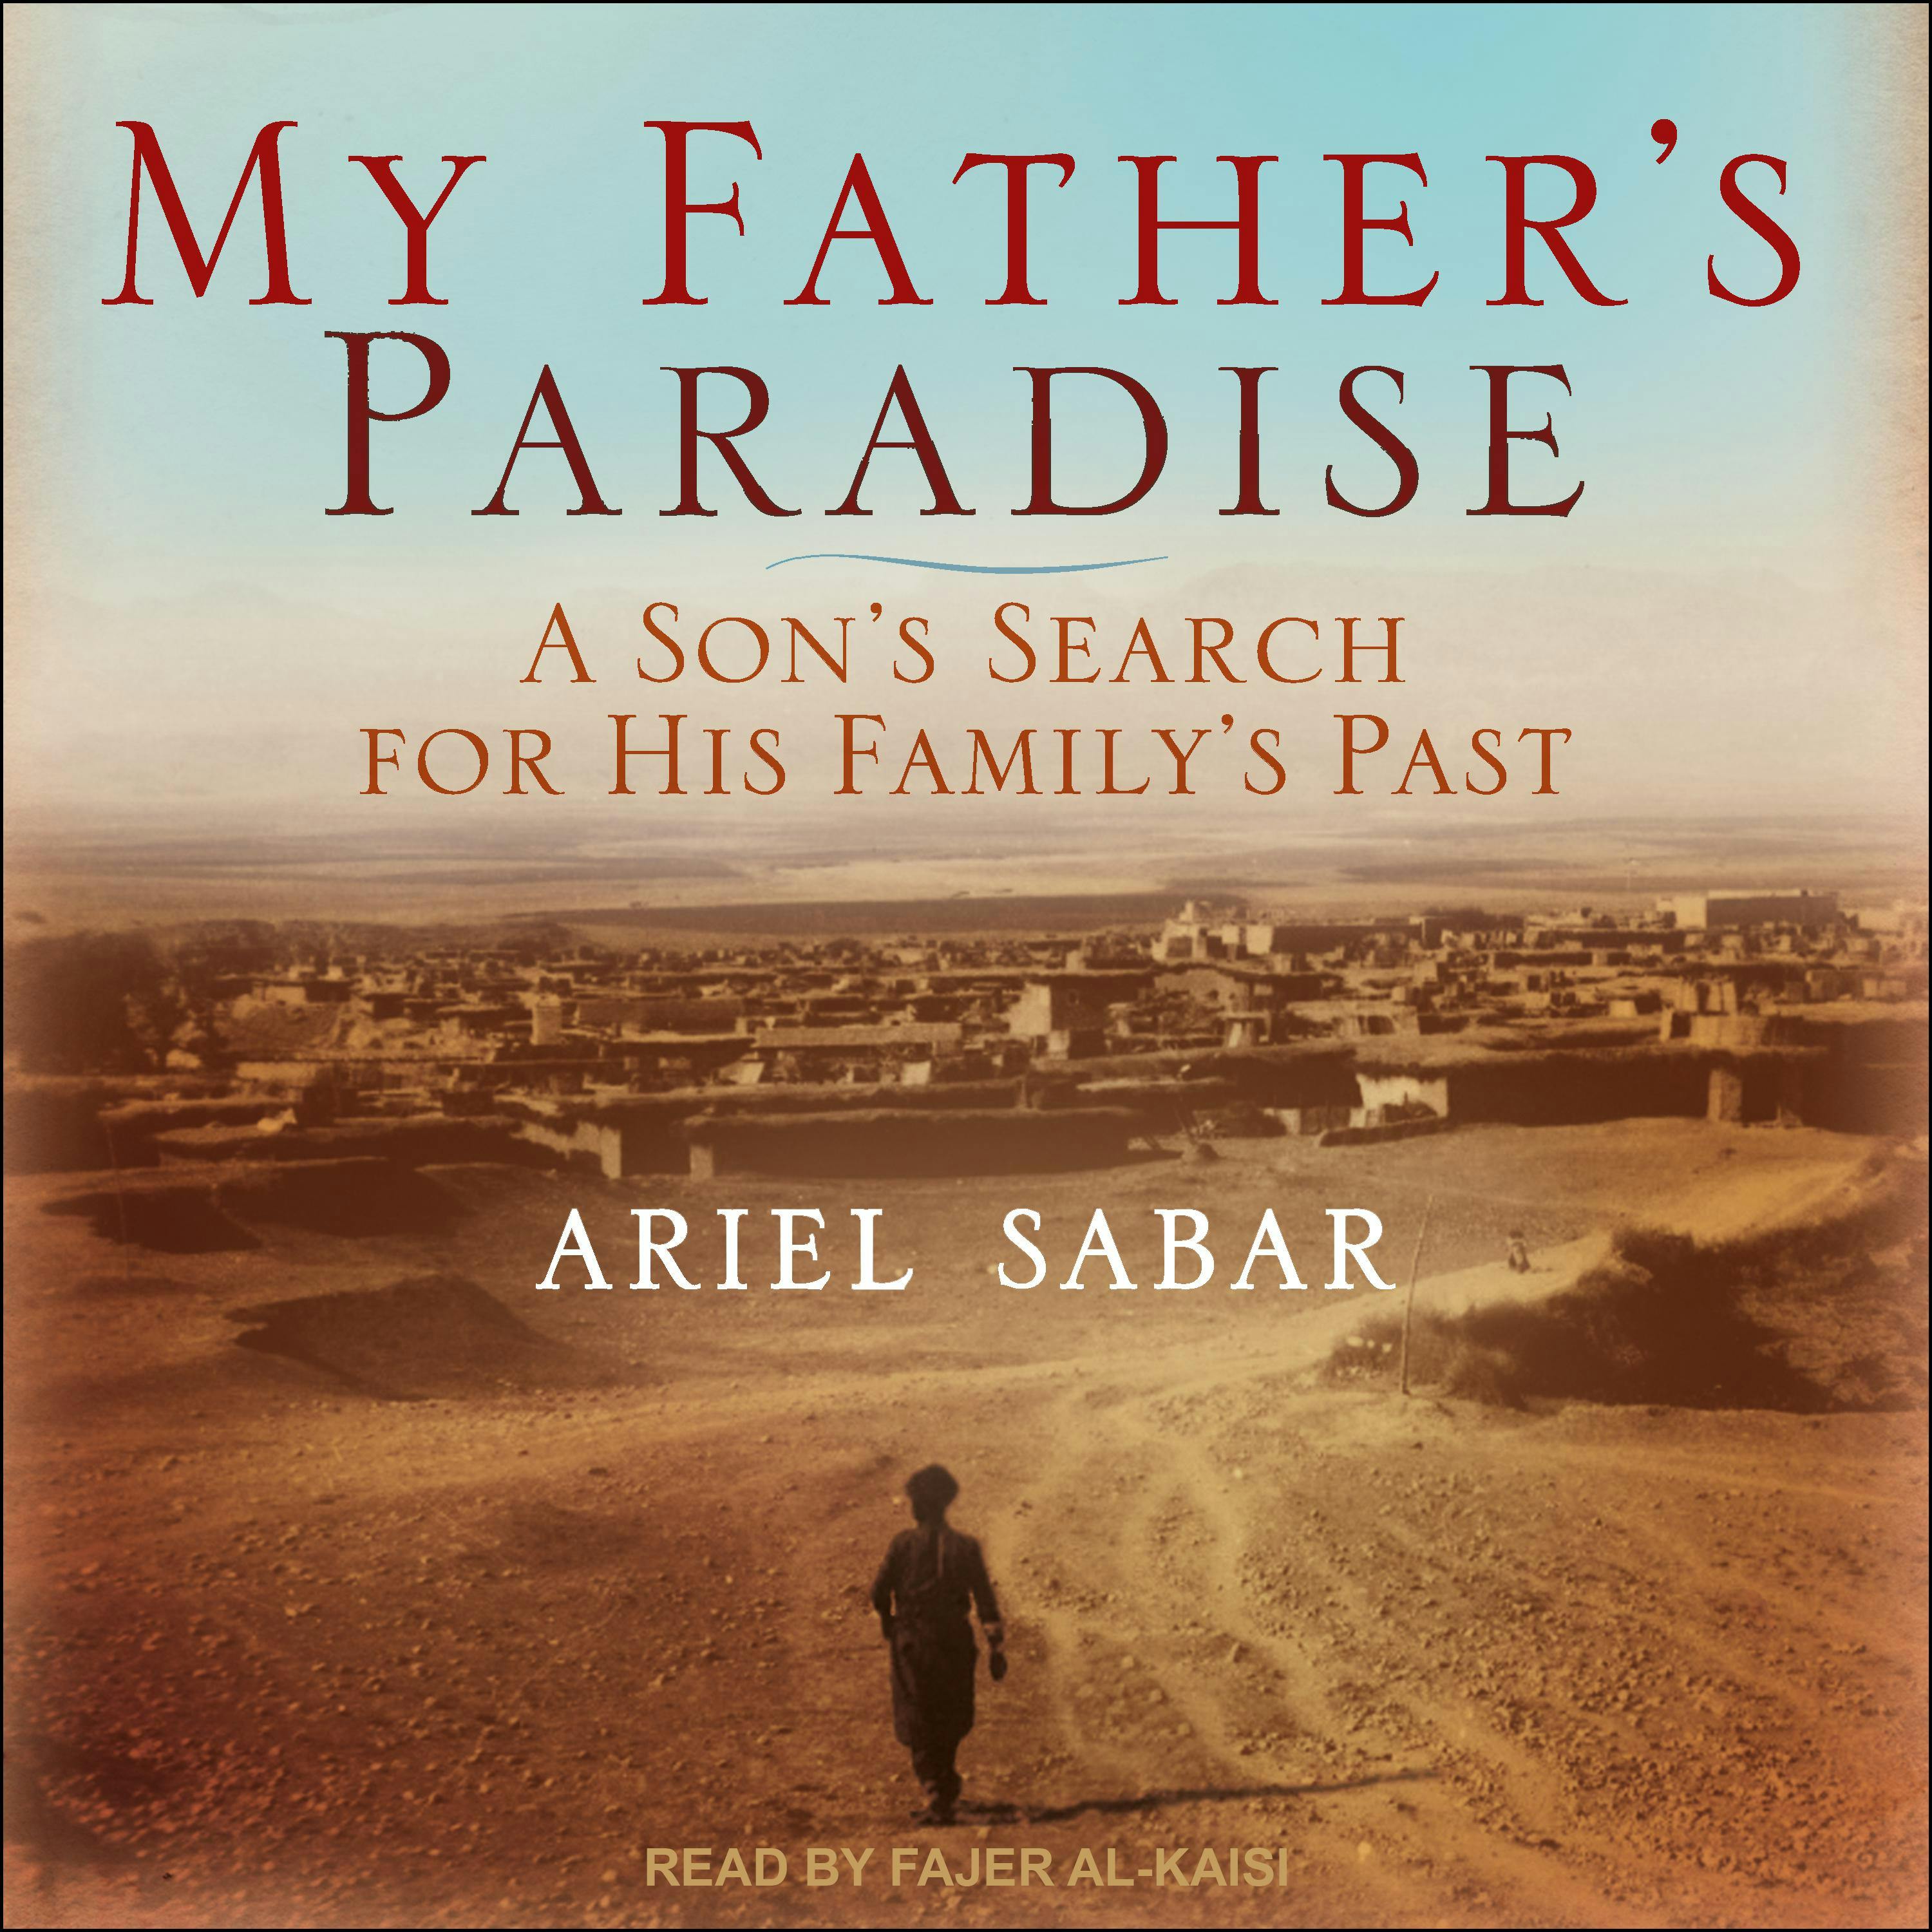 My Father's Paradise: A Son's Search For His Family's Past - Ariel Sabar